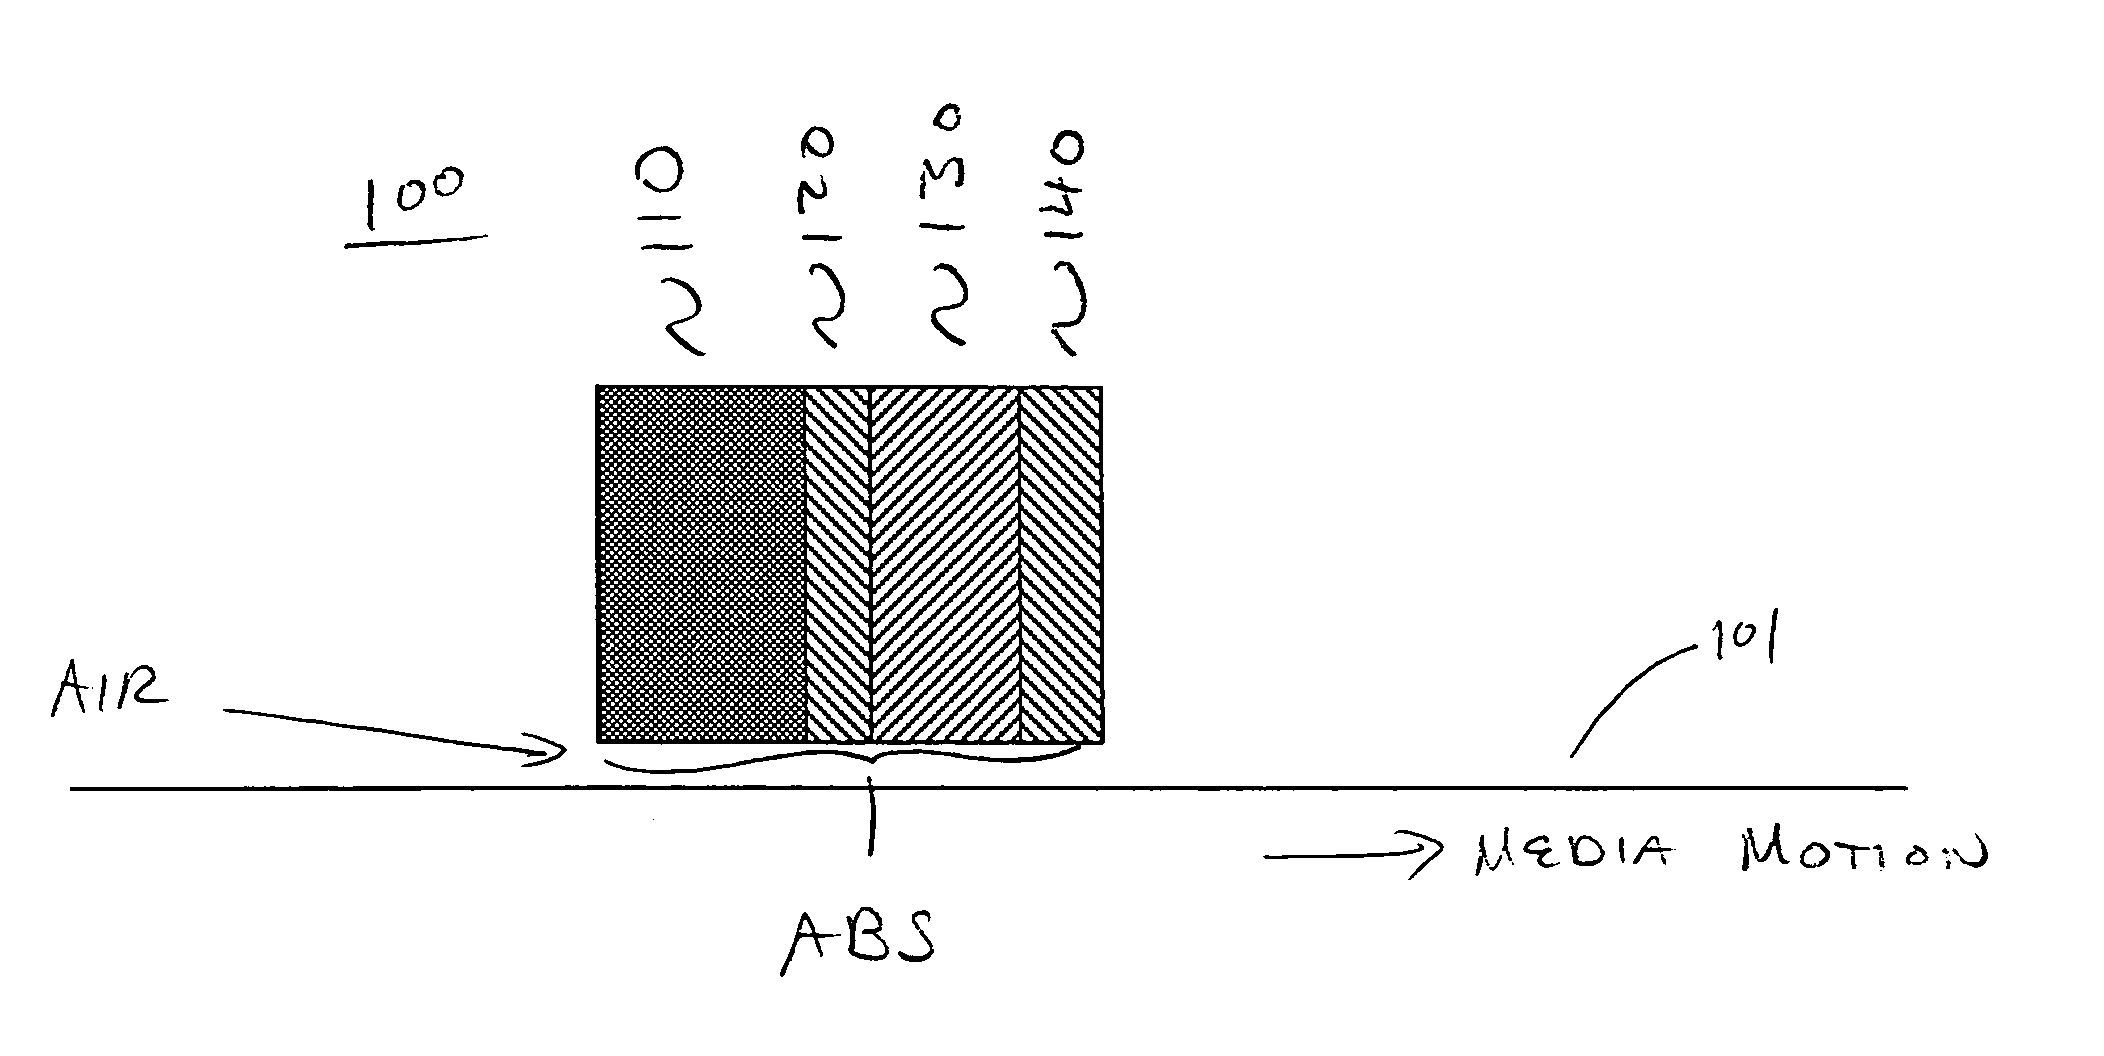 Magnetic recording head with reduced thermally induced protrusion